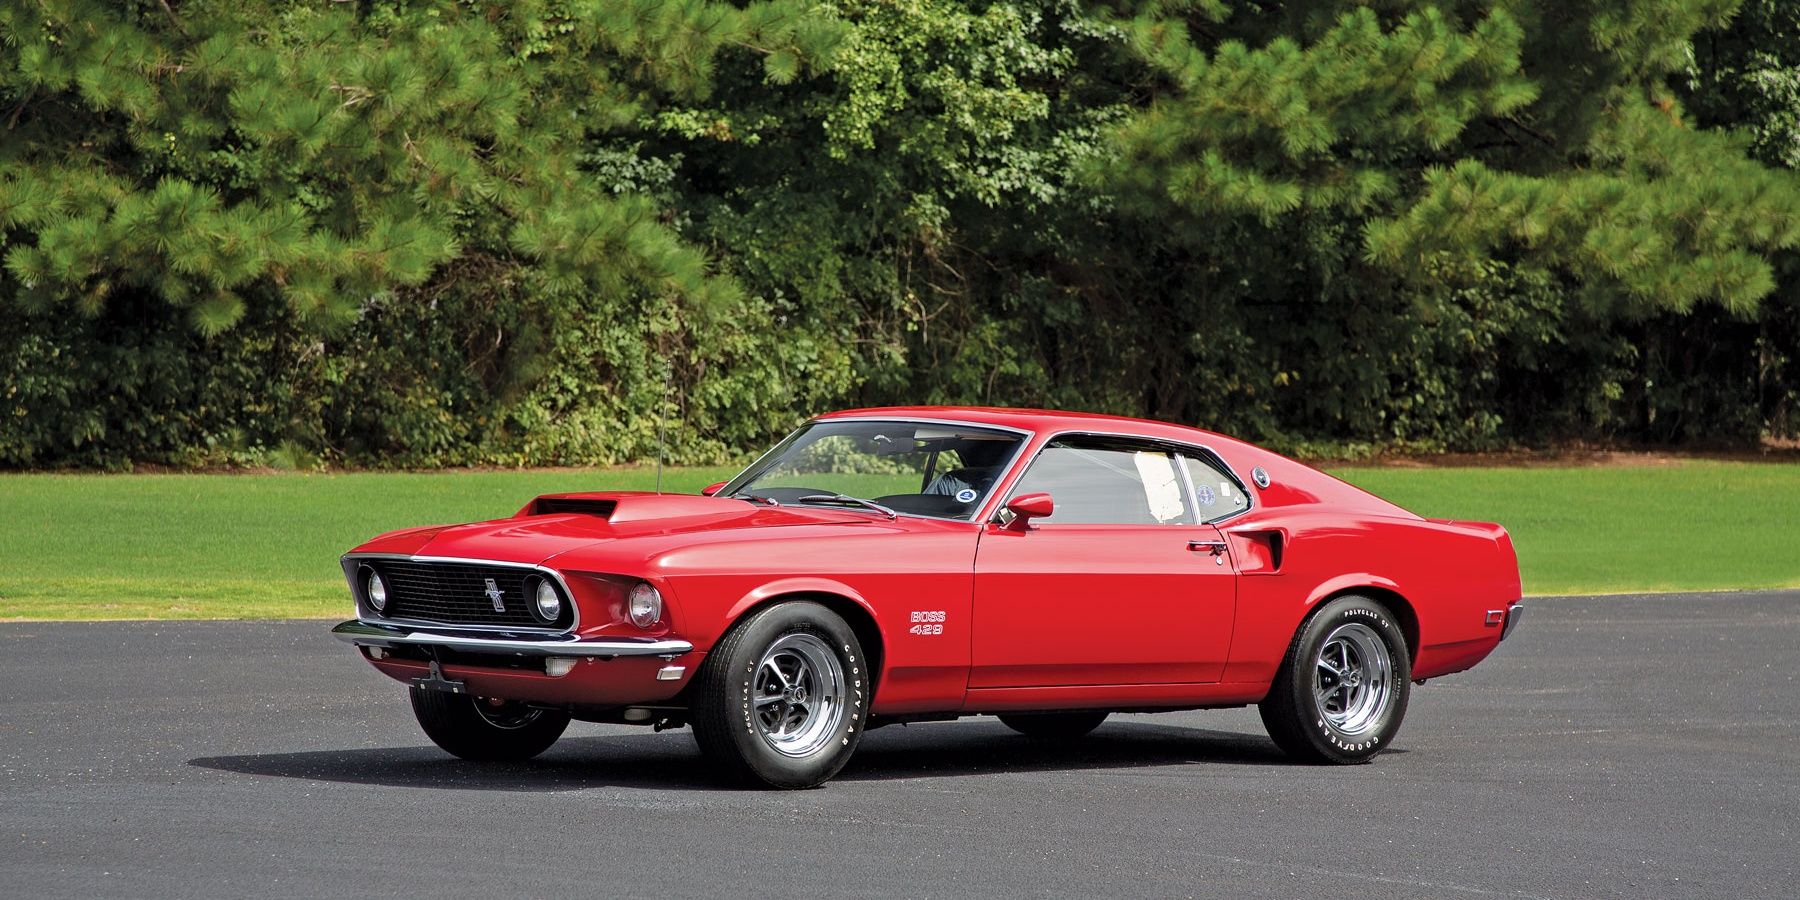 1969 - Boss 429 muscle car parked